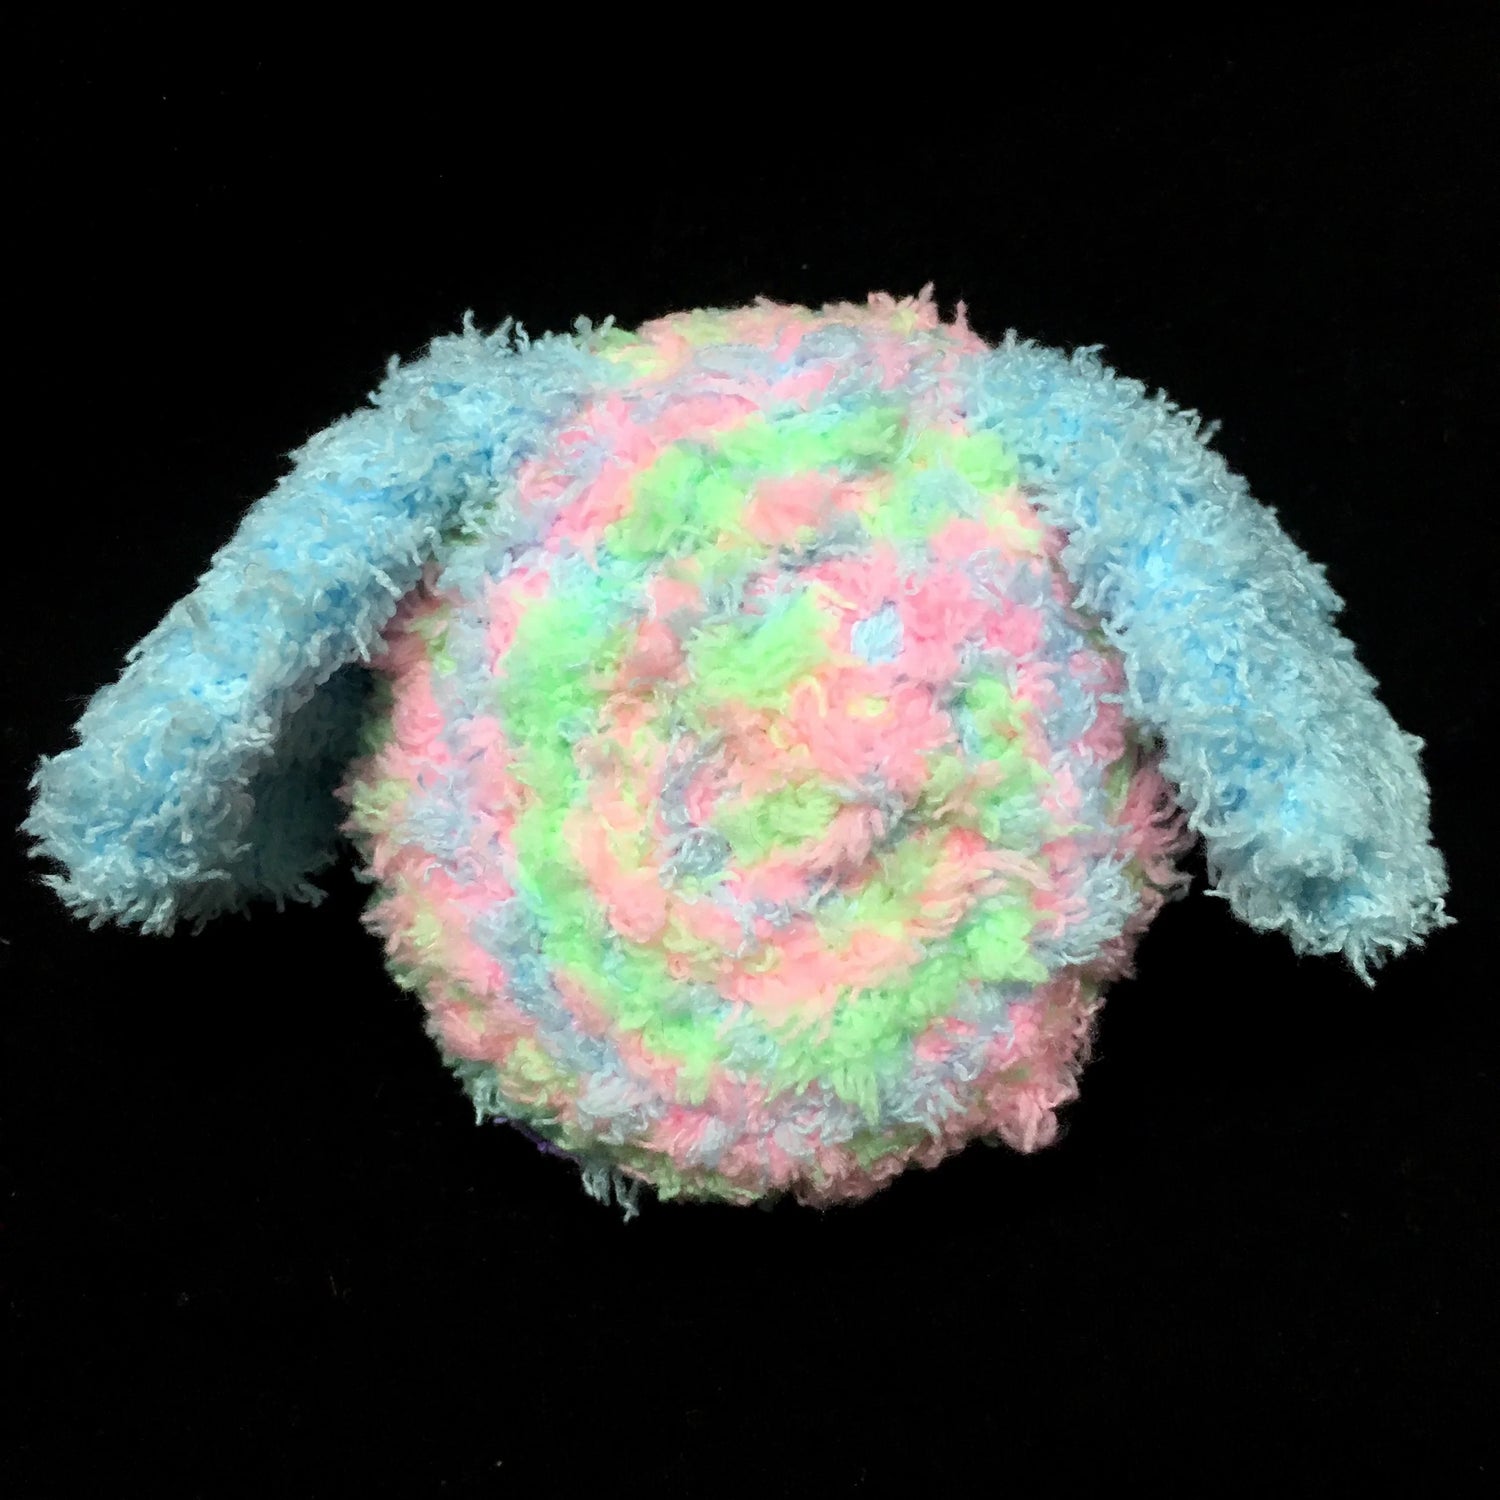 Tamagotchi Multicolor Cover with Floppy Ears Fuzzy N Chic